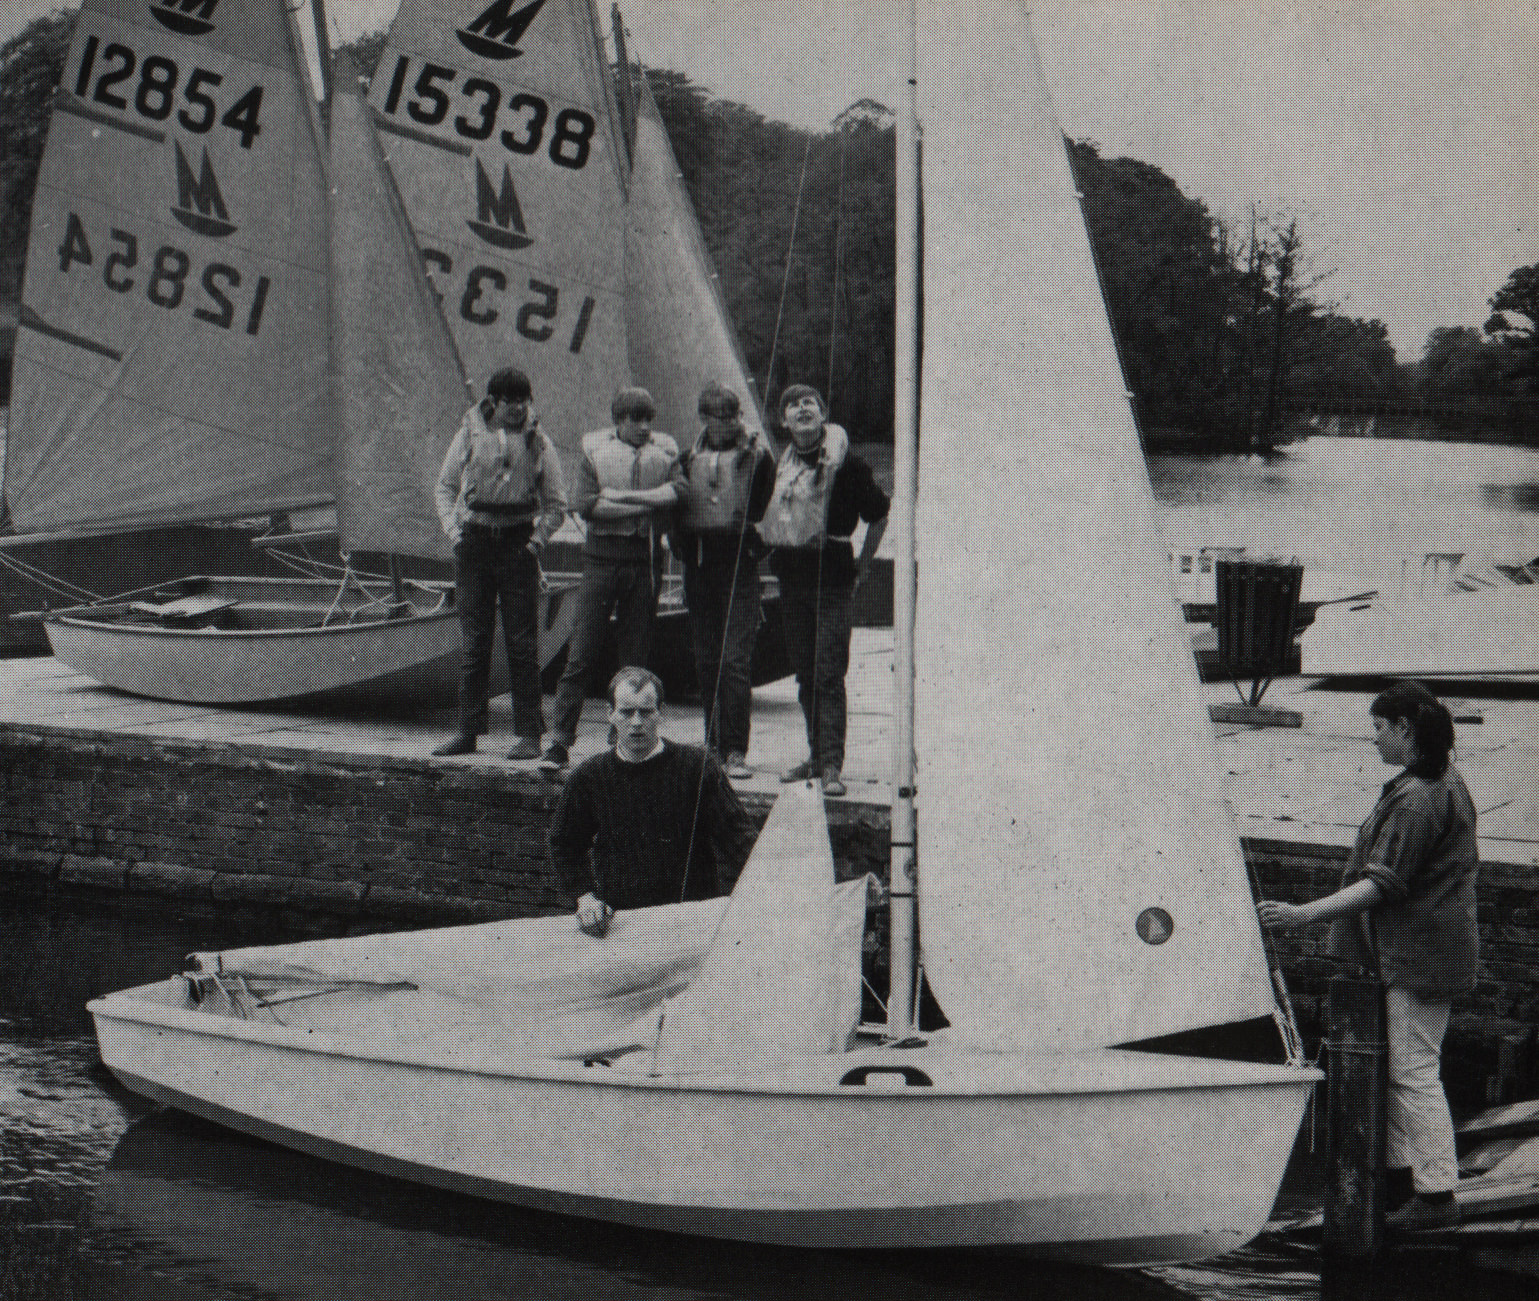 Four boys wait on the dock by the lake to get in to the sail boat held by two adults.